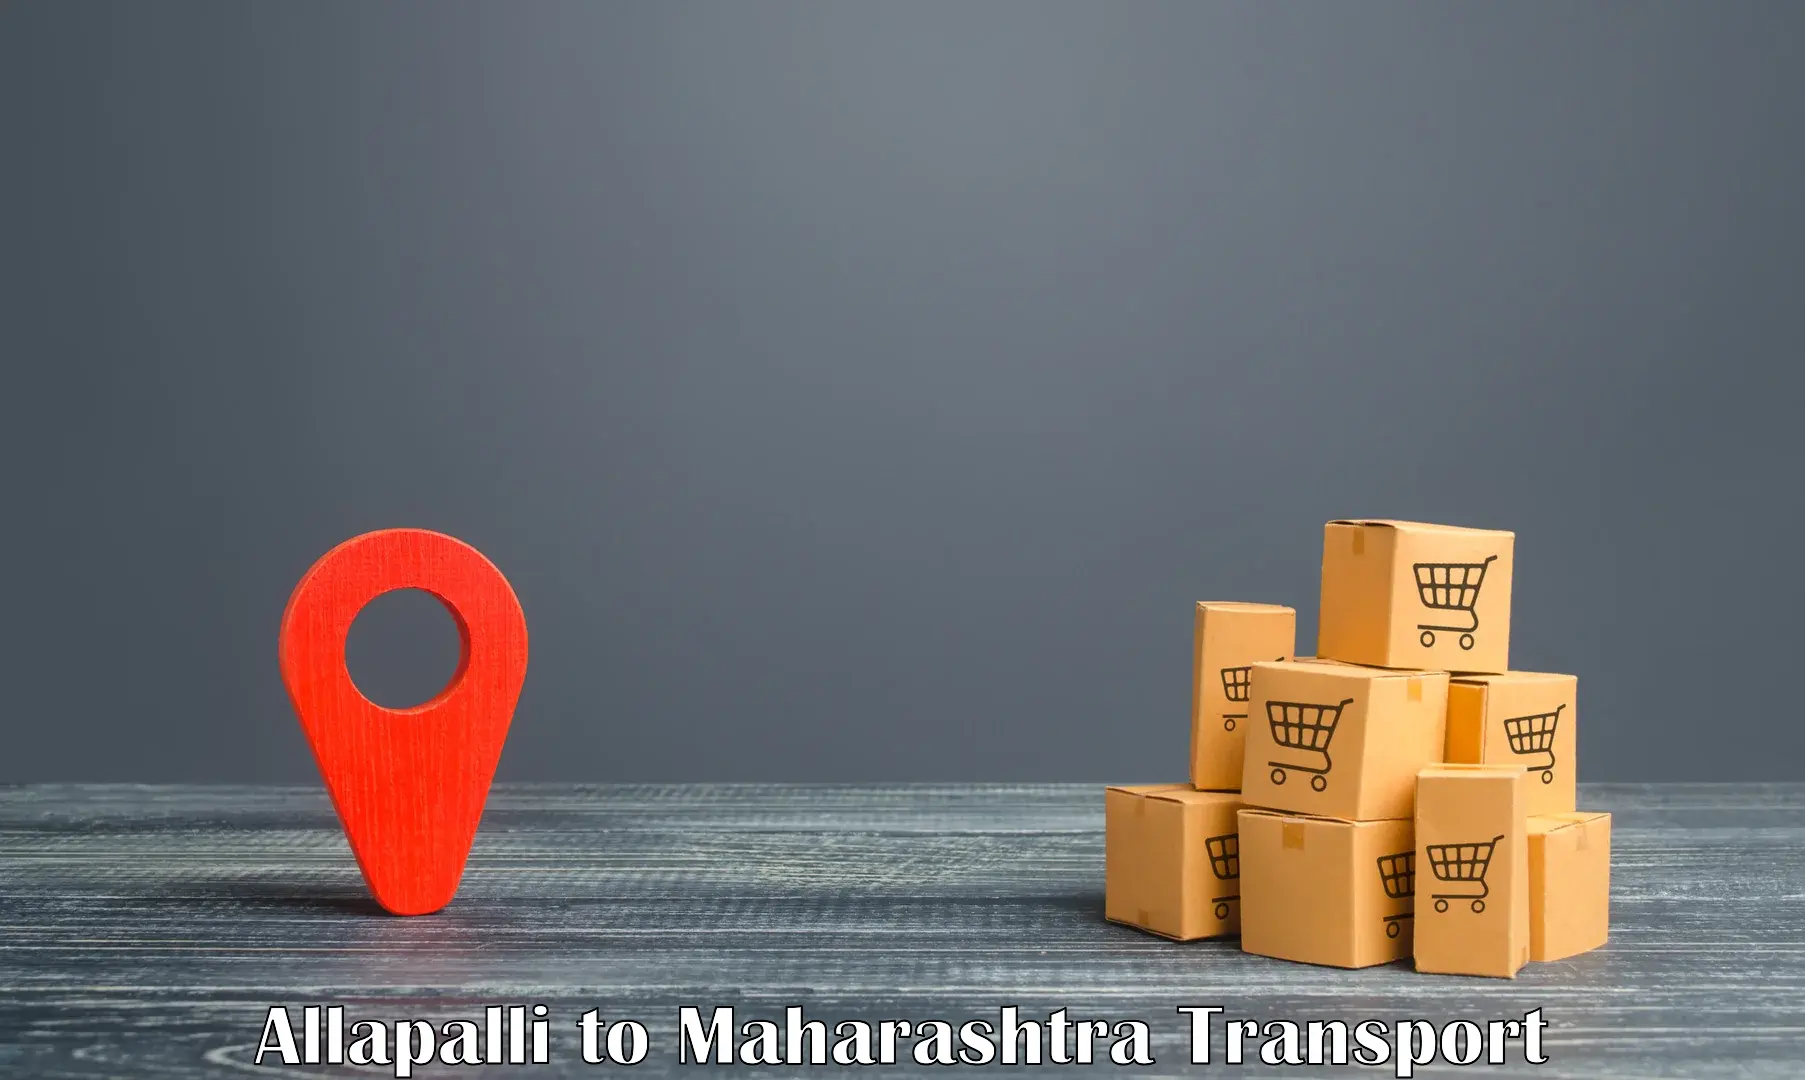 Express transport services in Allapalli to Andheri